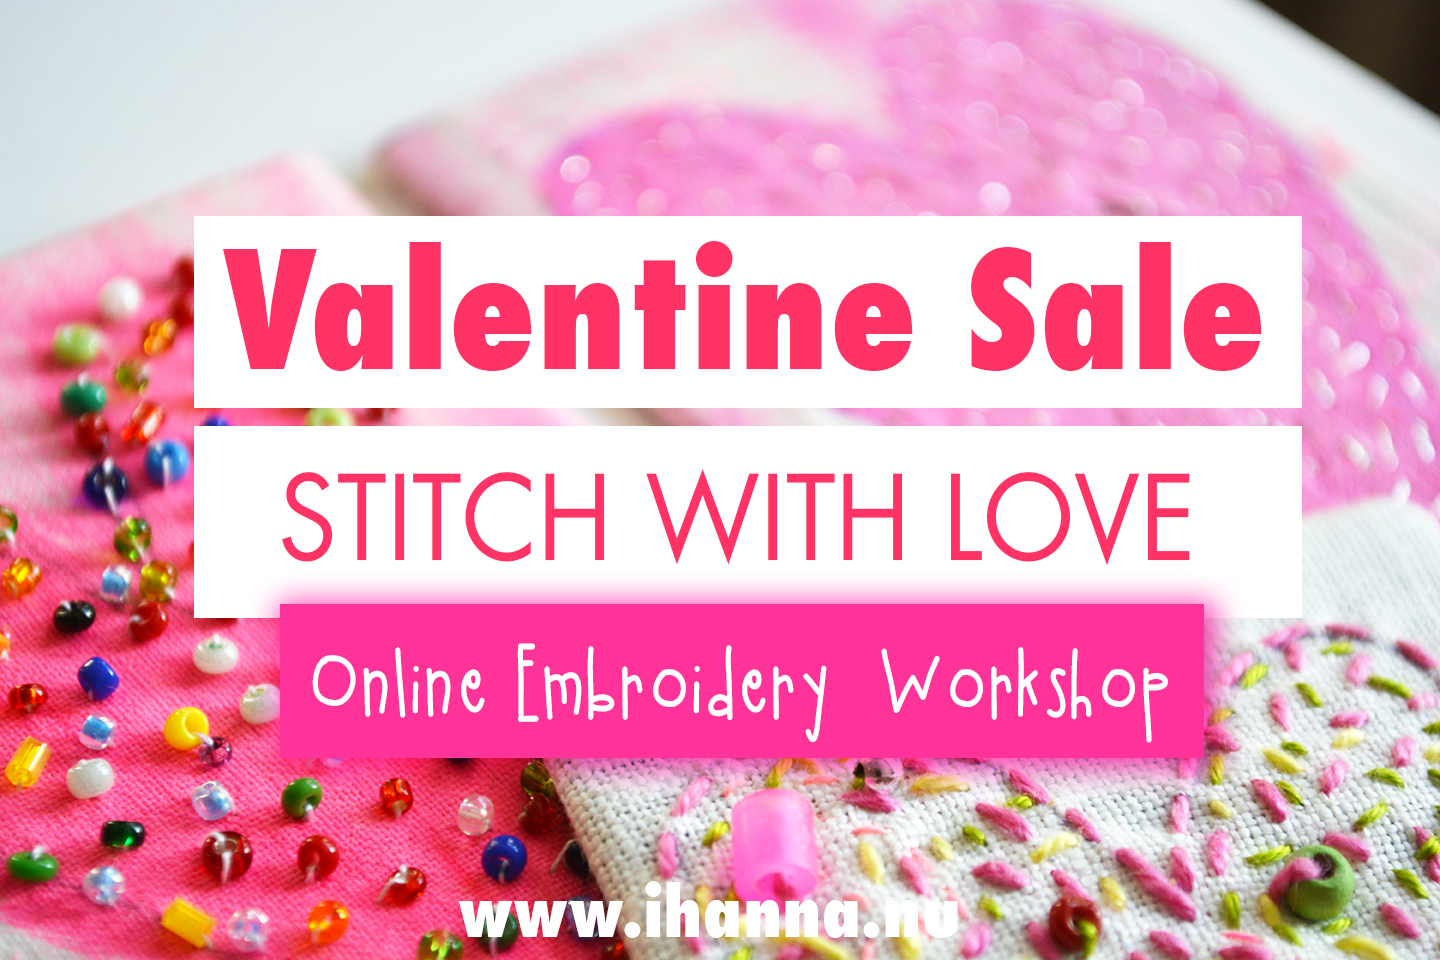 Valentine Sale February 6 -15 - get the online mixed media workshop right now